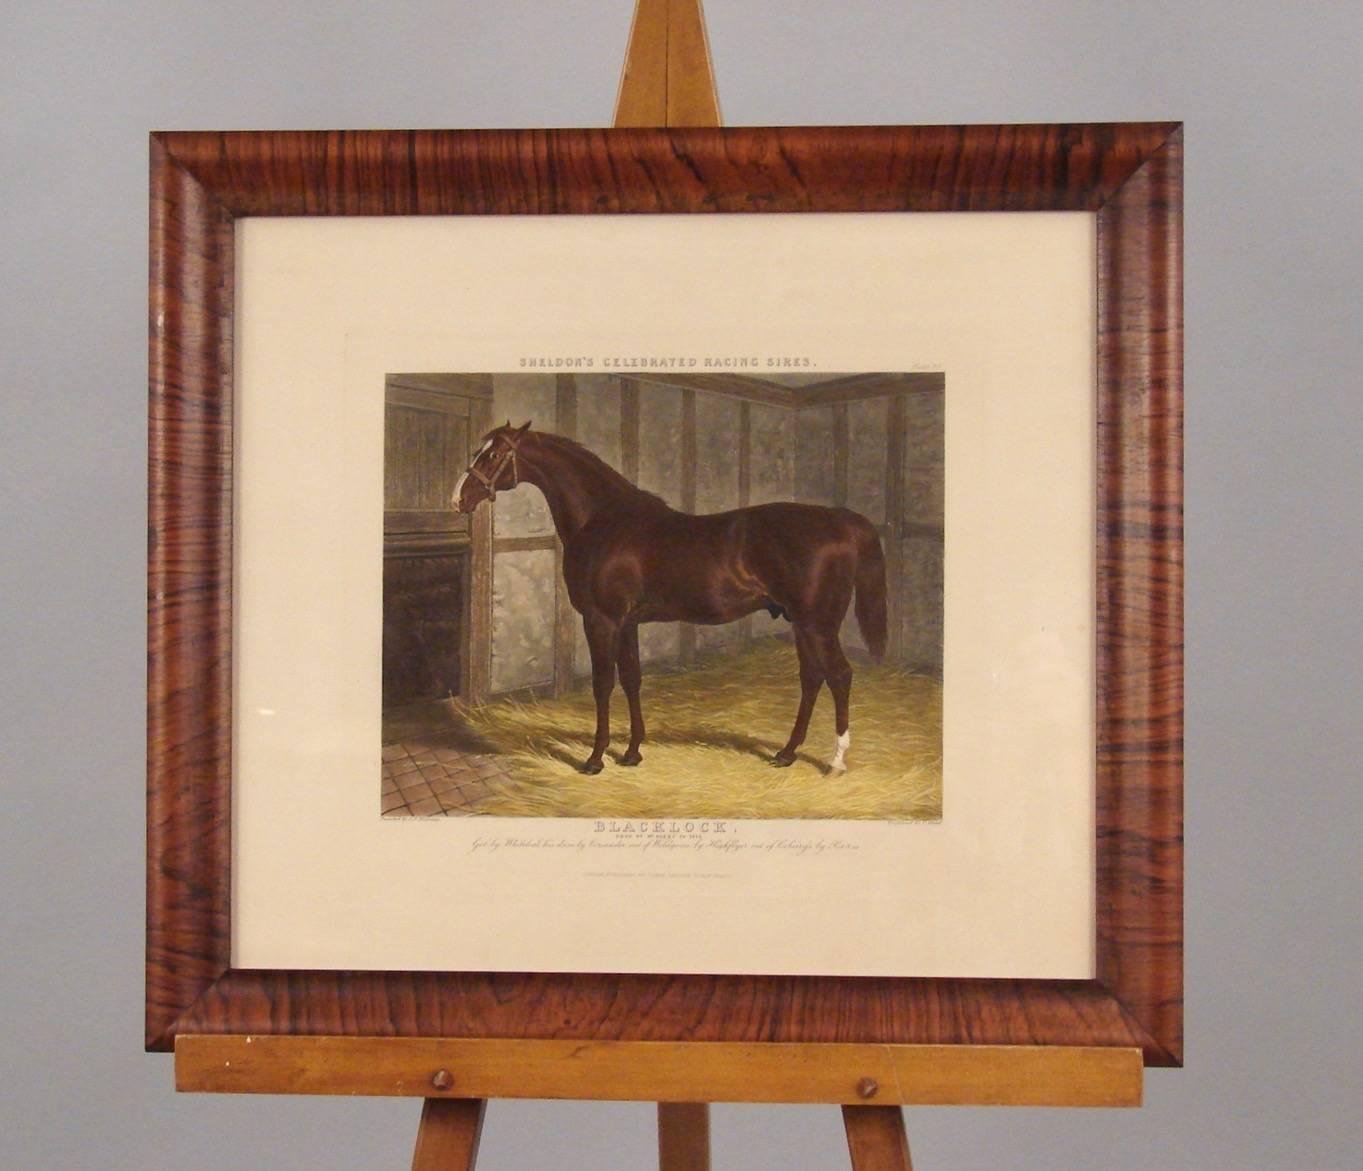 Group of Four Colored Engravings of Sheldon's Celebrated Racing Sires 1